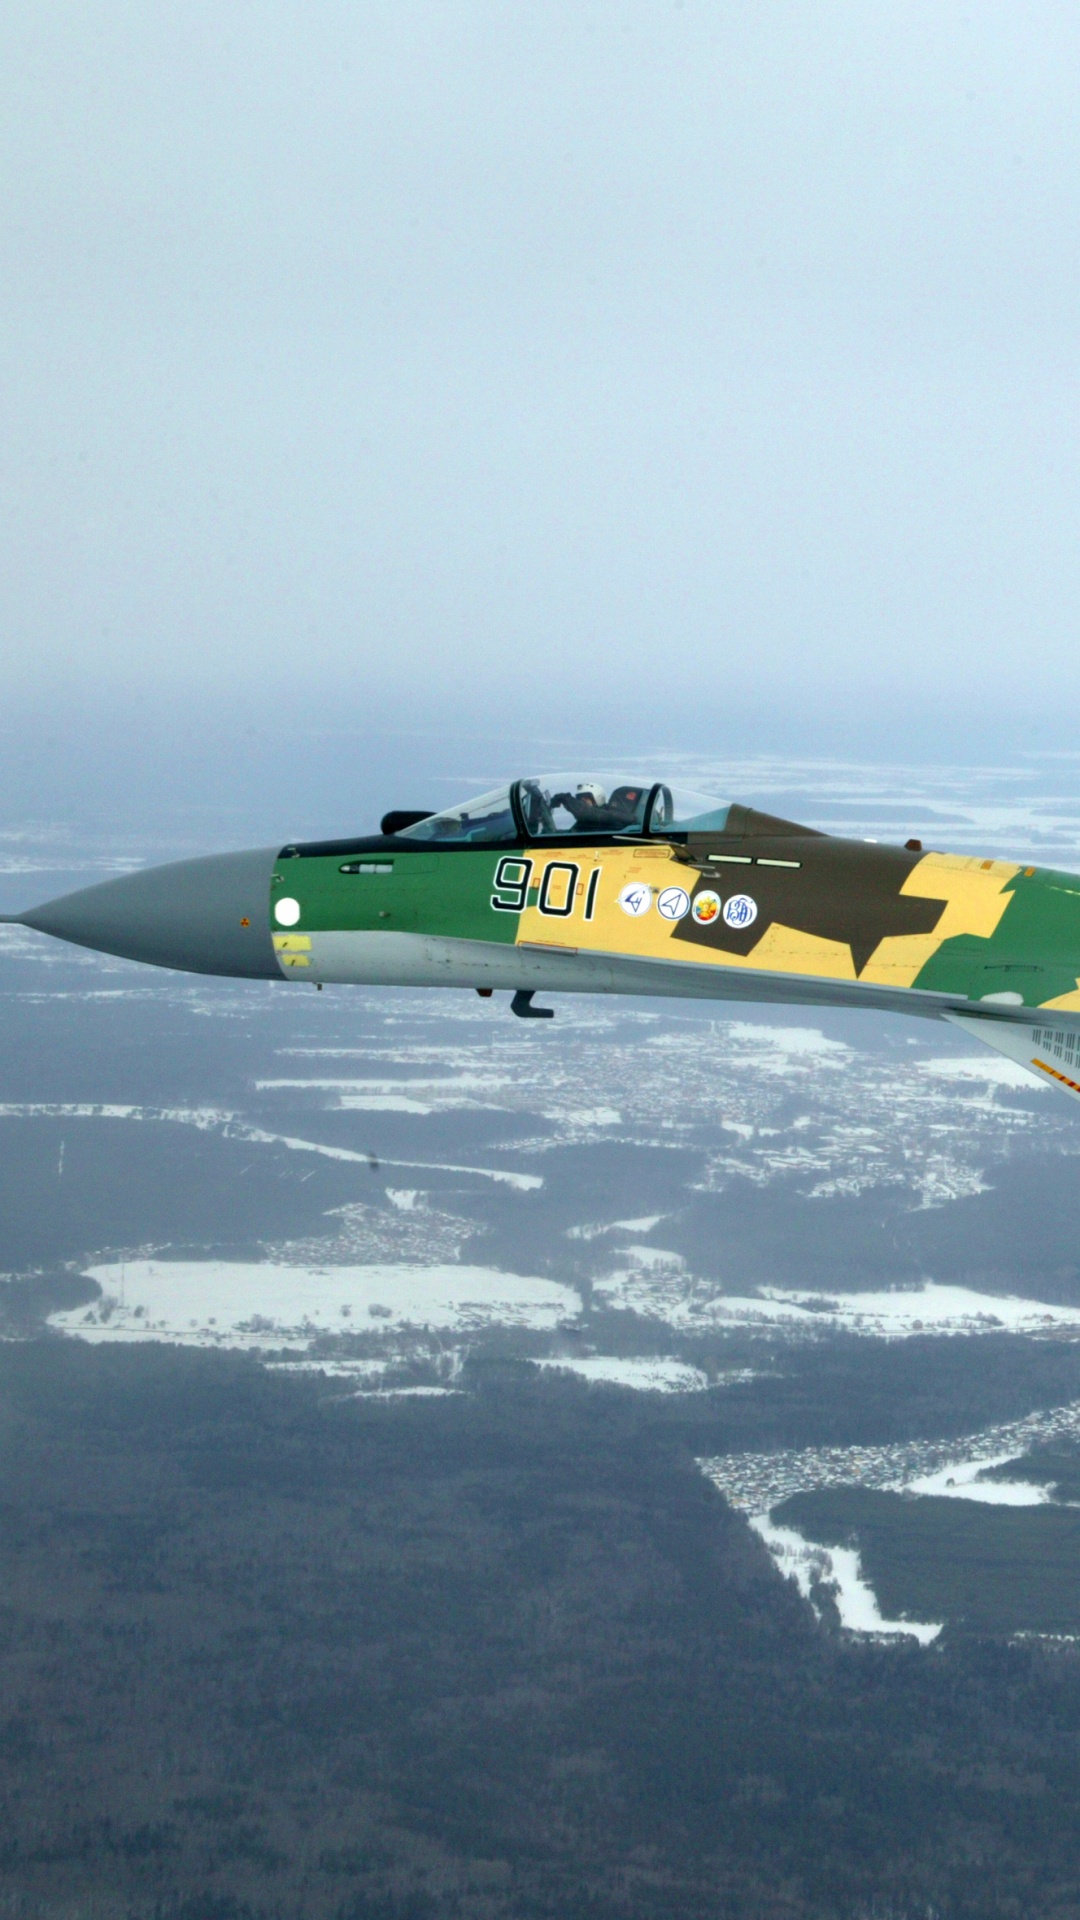 Green and Yellow Fighter Plane on Mid Air During Daytime. Wallpaper in 1080x1920 Resolution